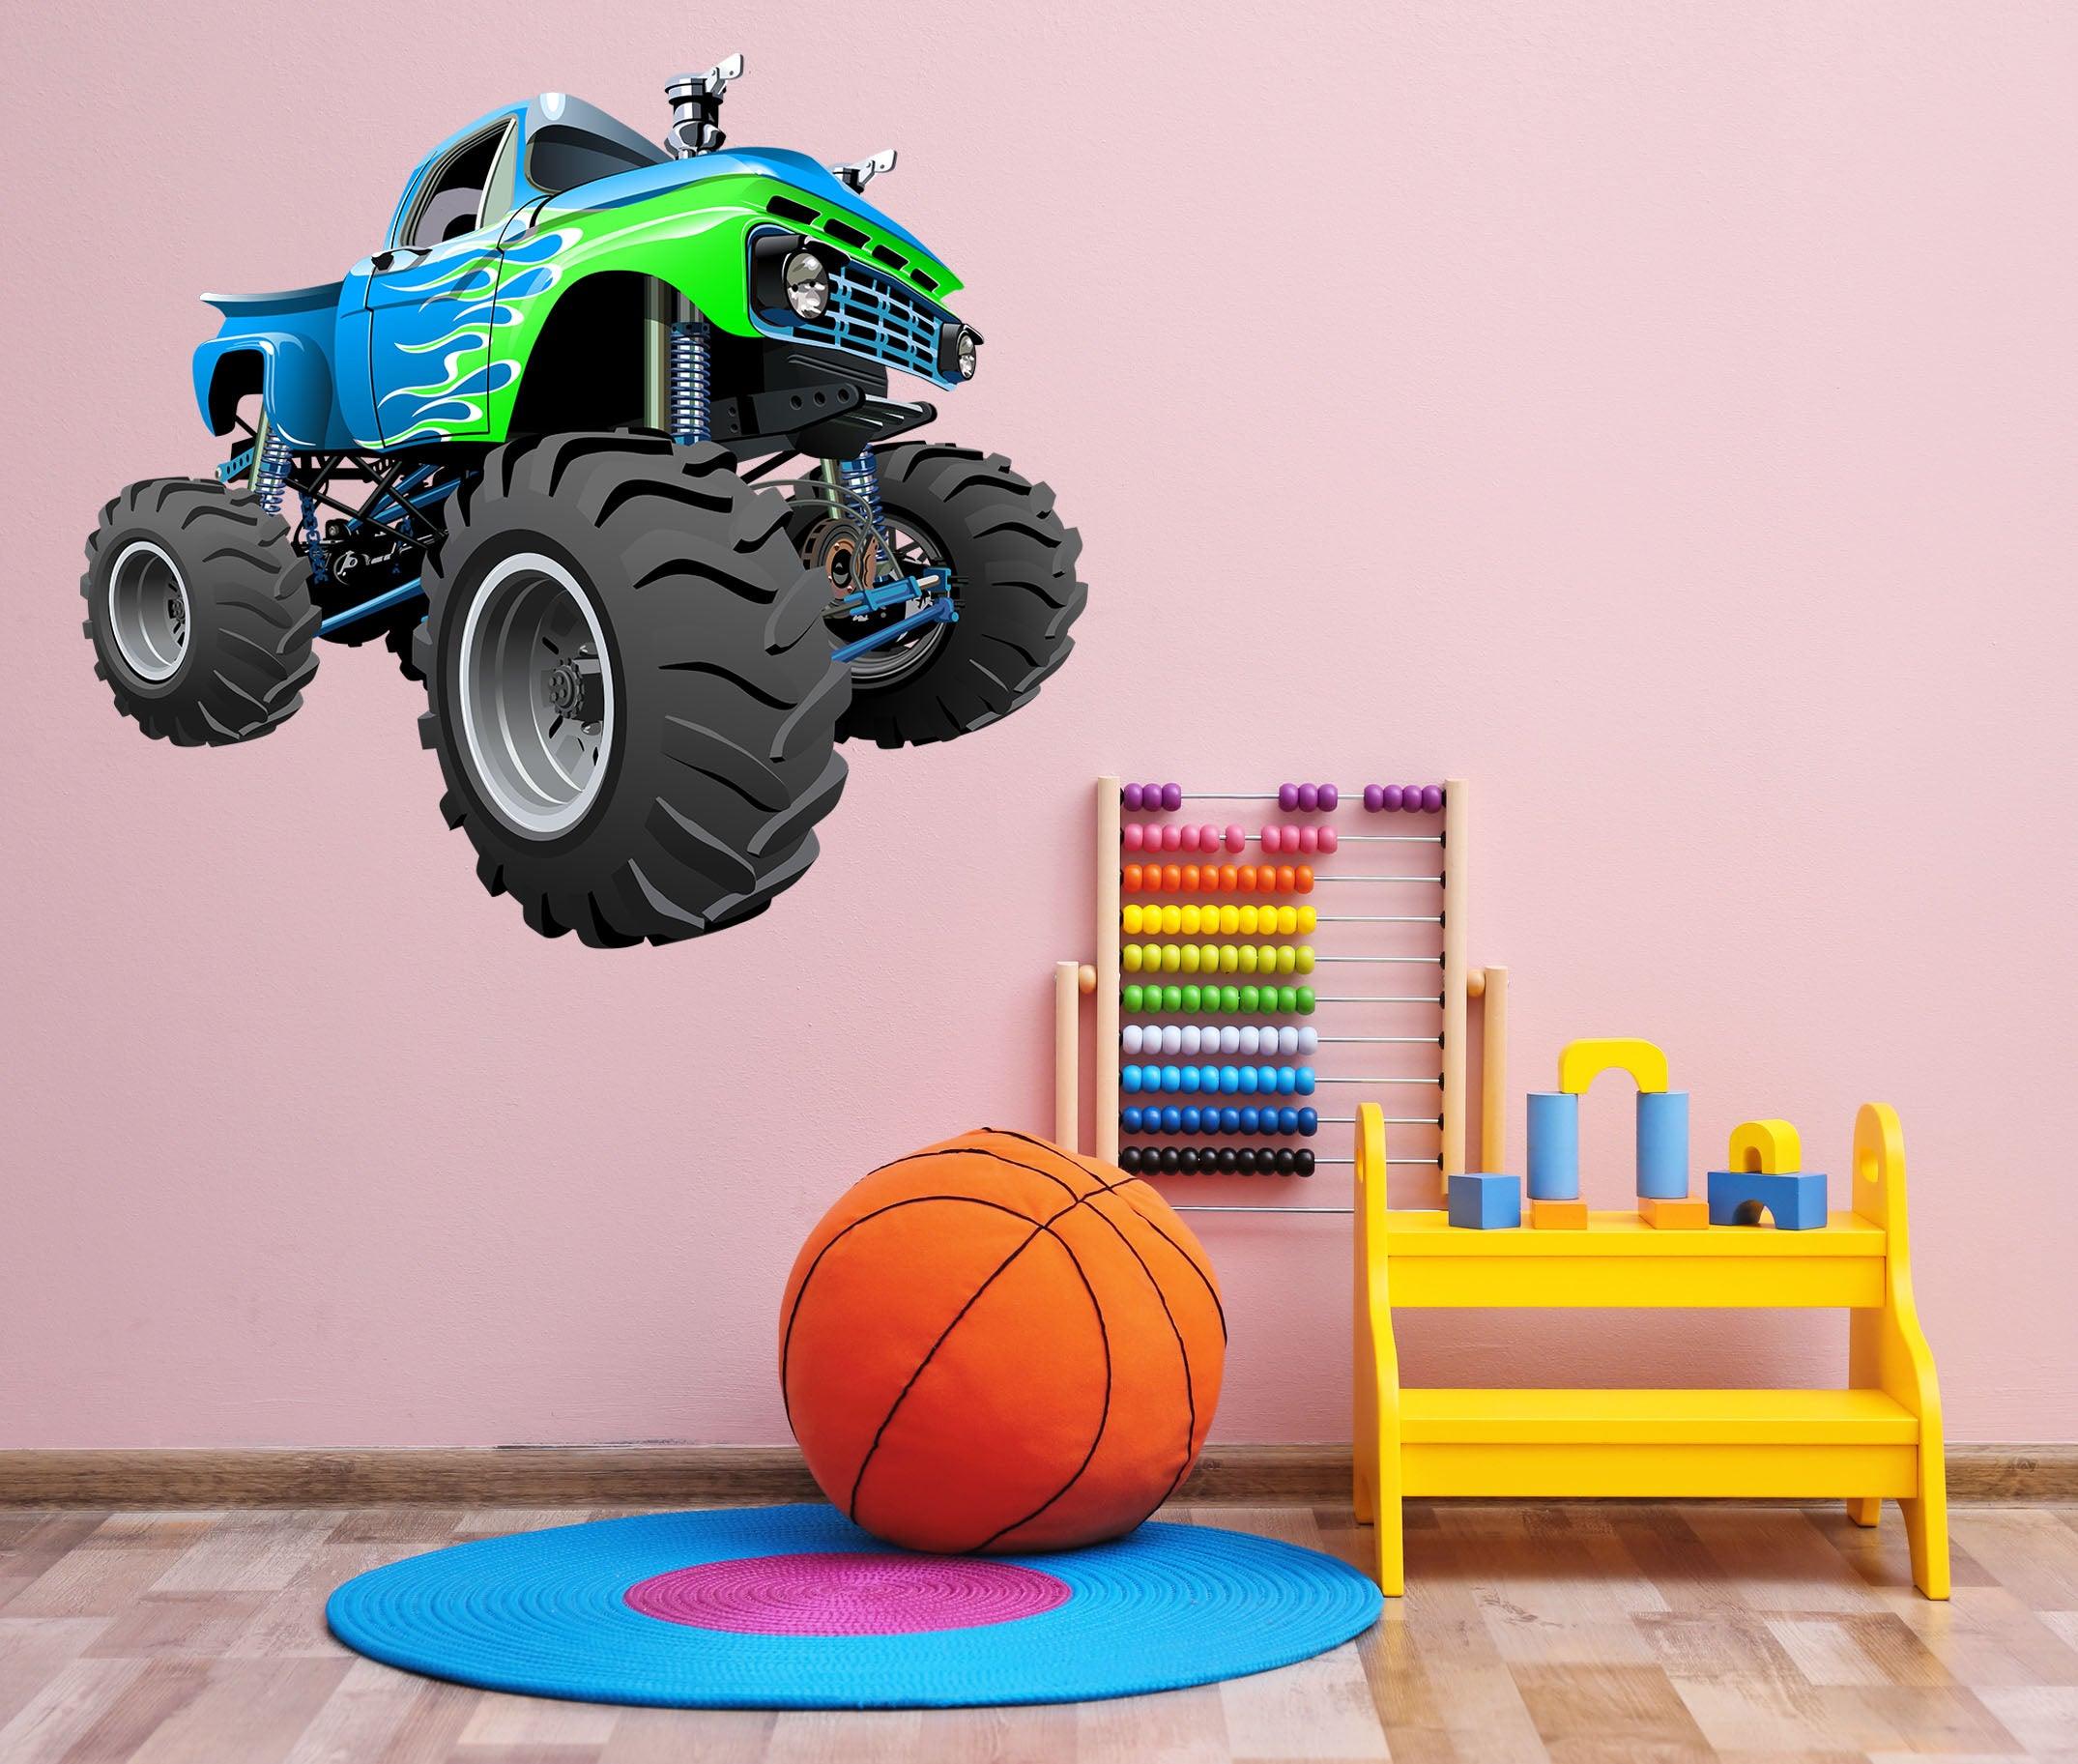 3D Green & Blue Monster Truck on Wall, Wall Decal Sticker, Removable 106